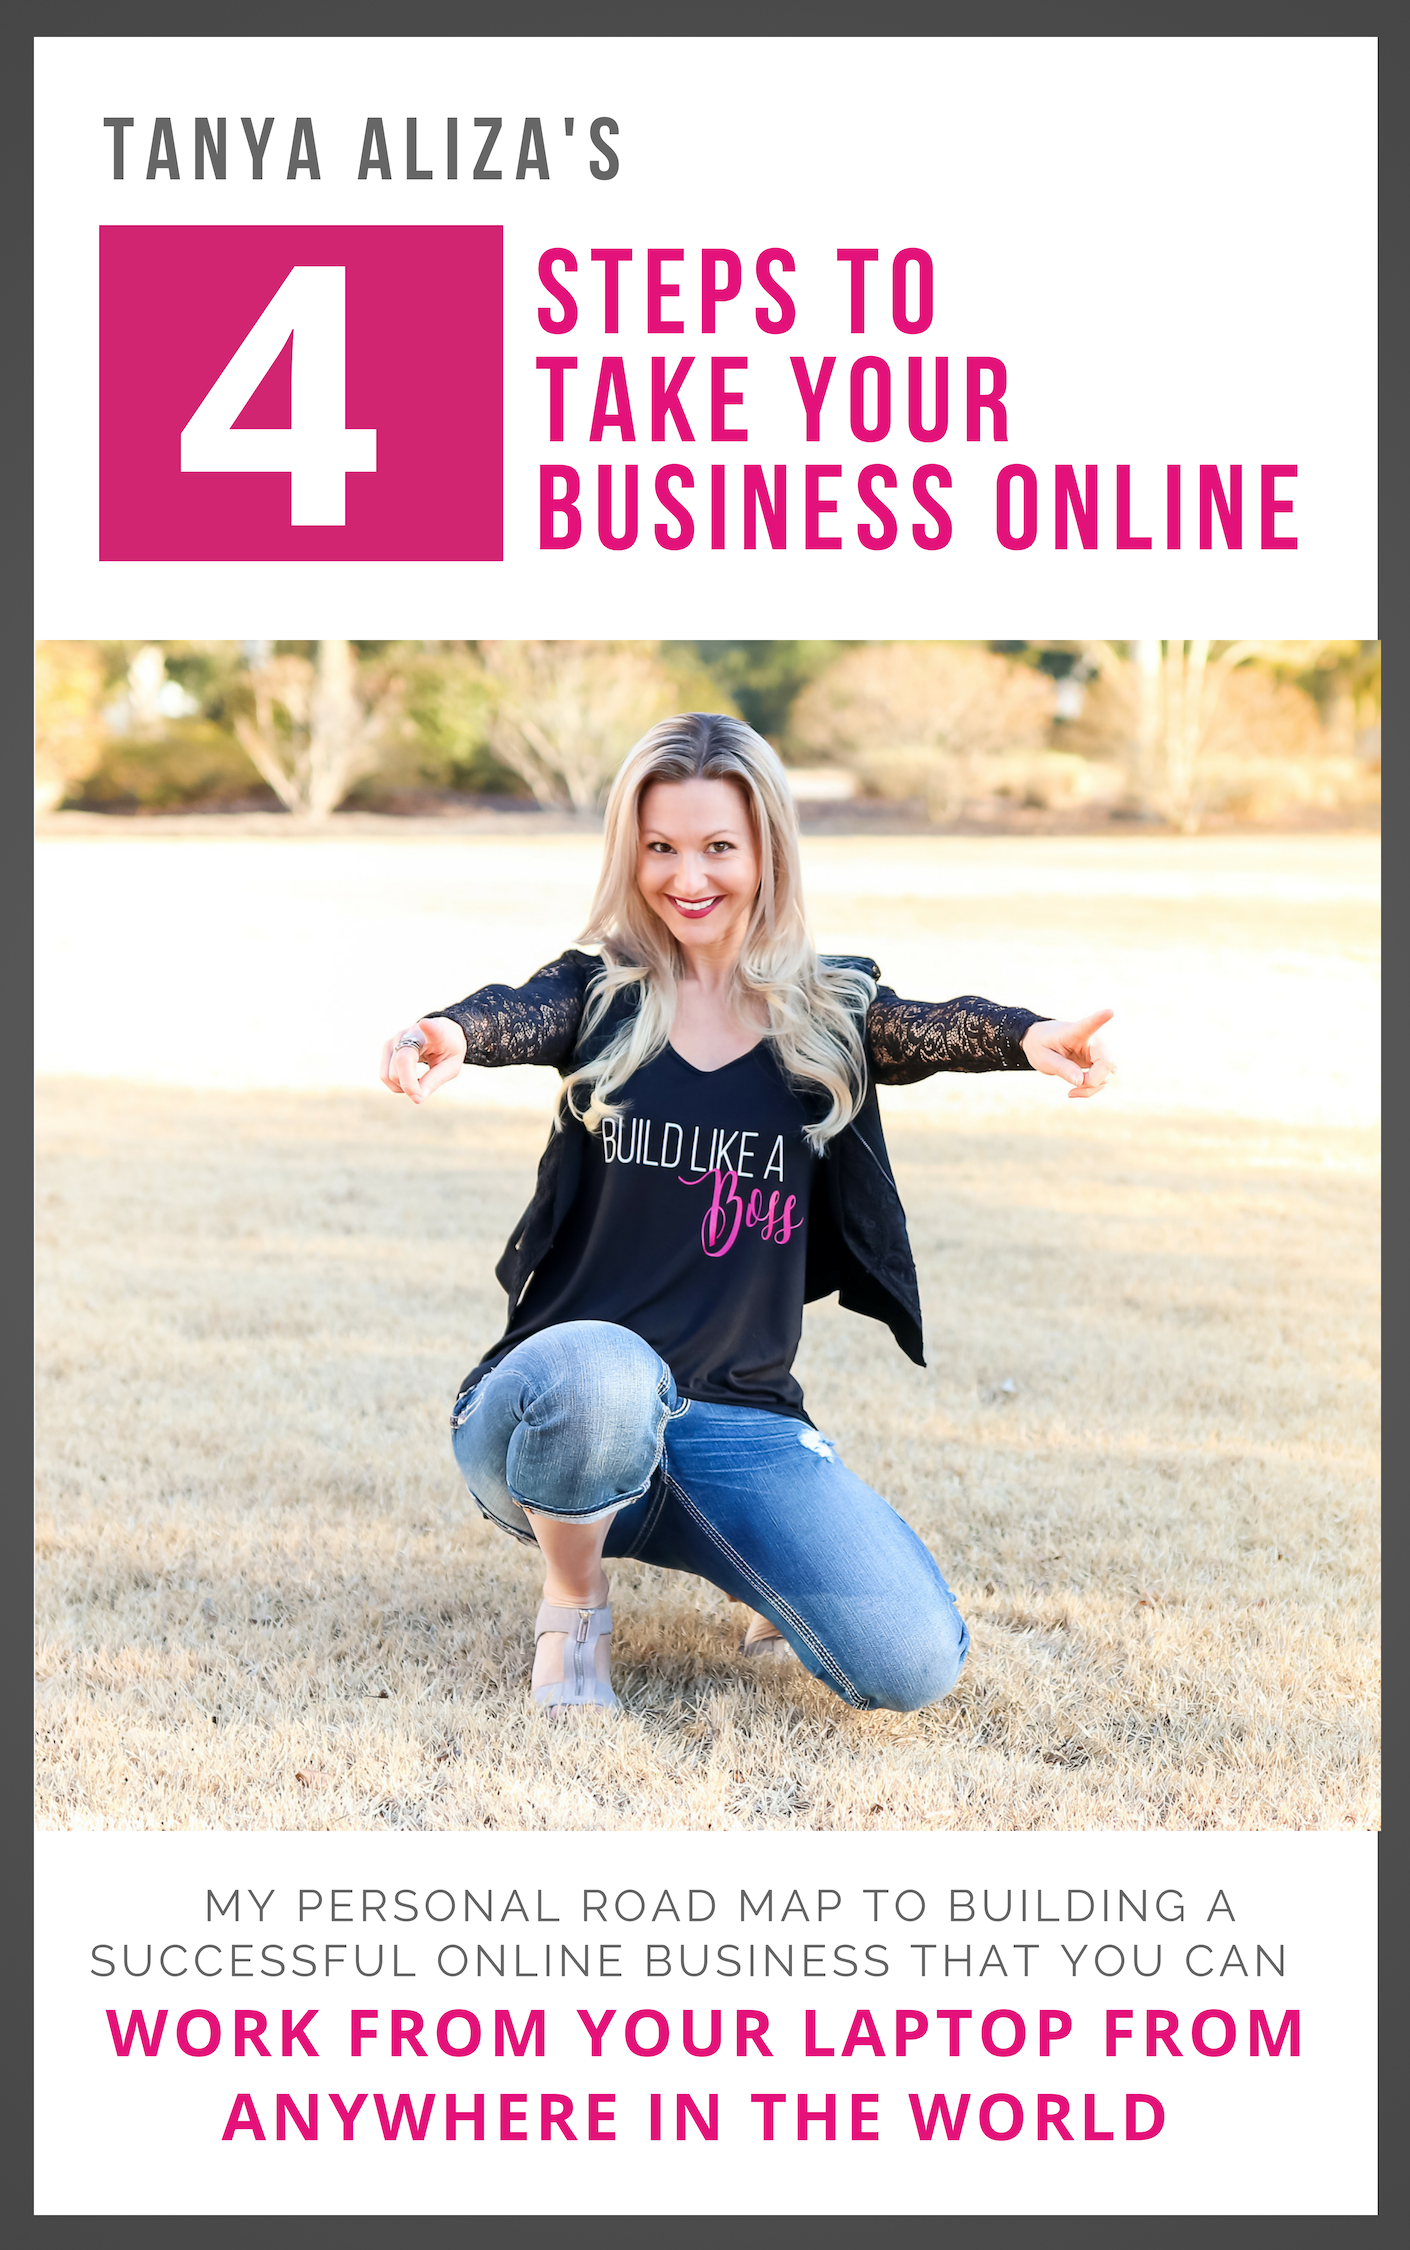 Tanya’s 4 Steps To Taking Your Business Online